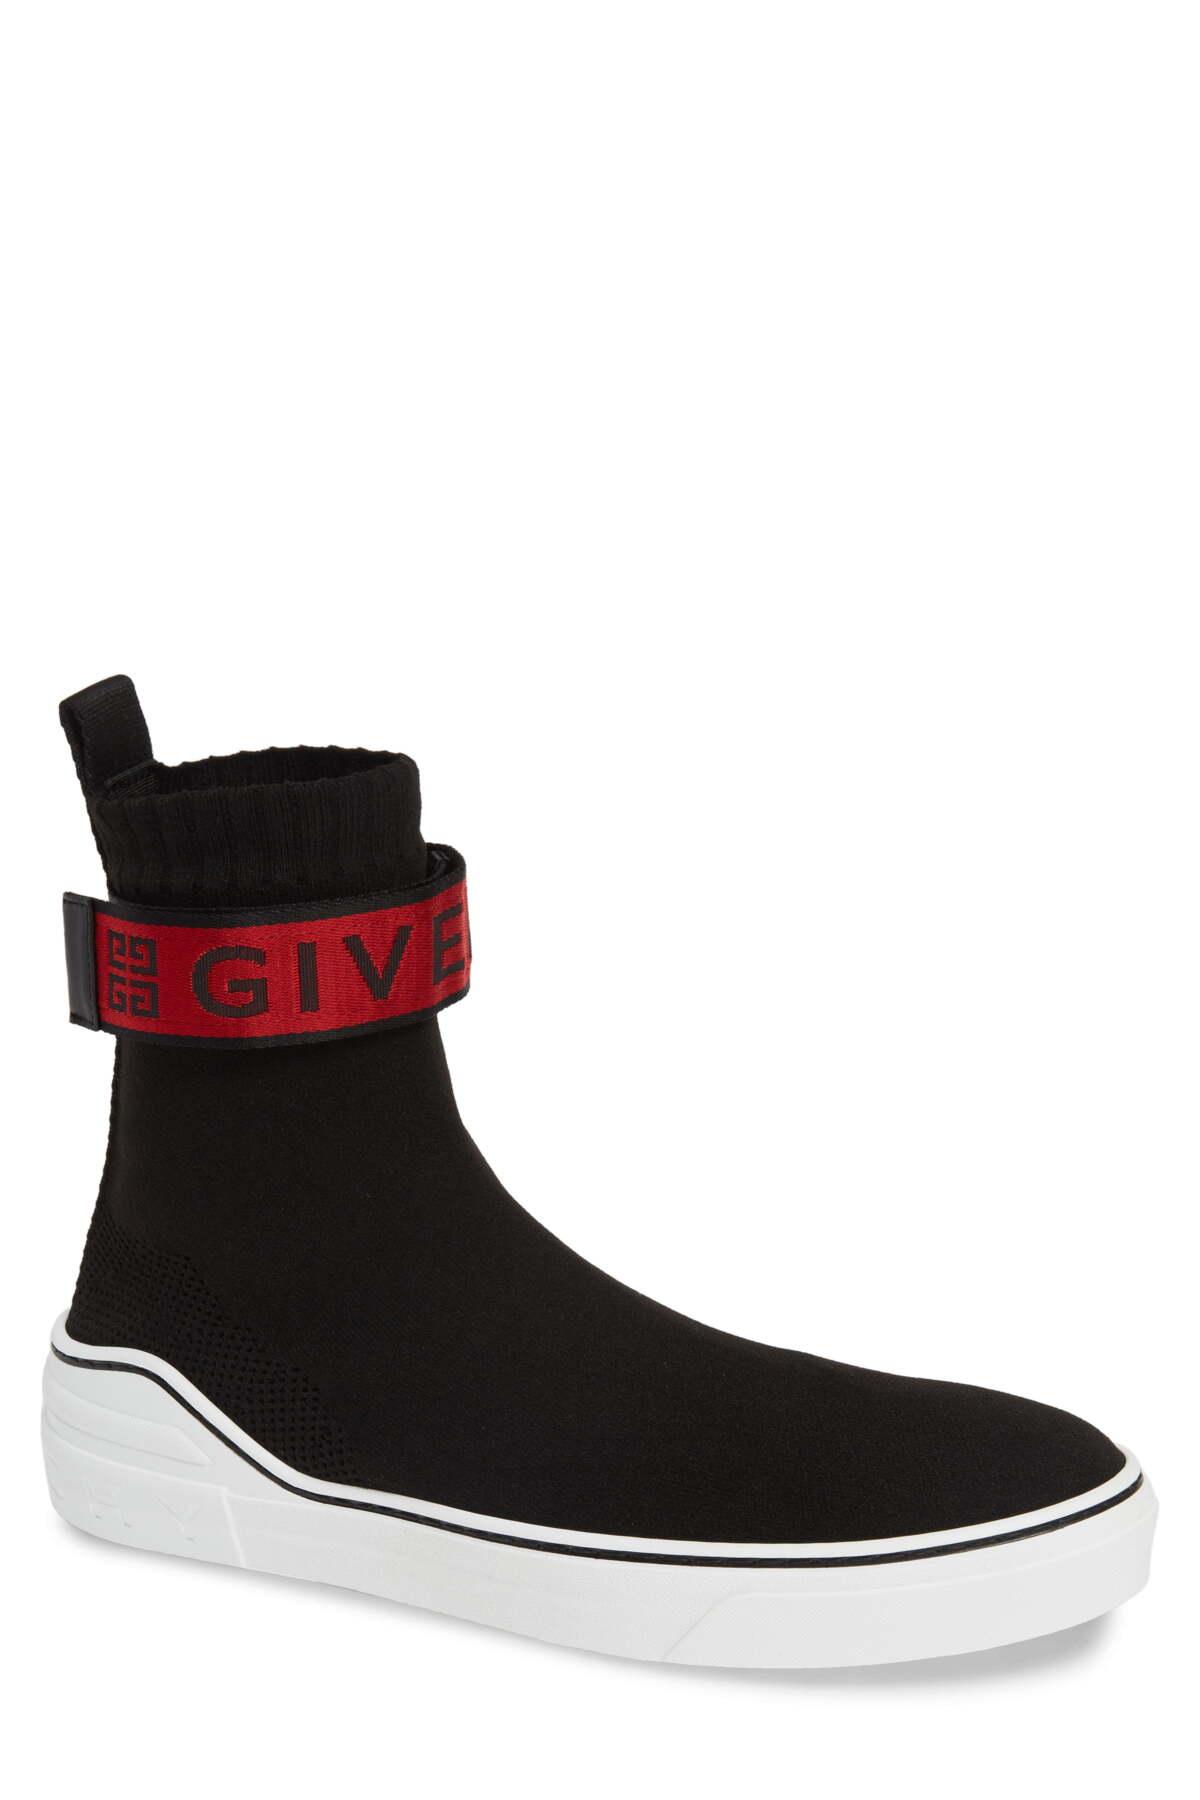 Givenchy George V Knit Sneakers in 